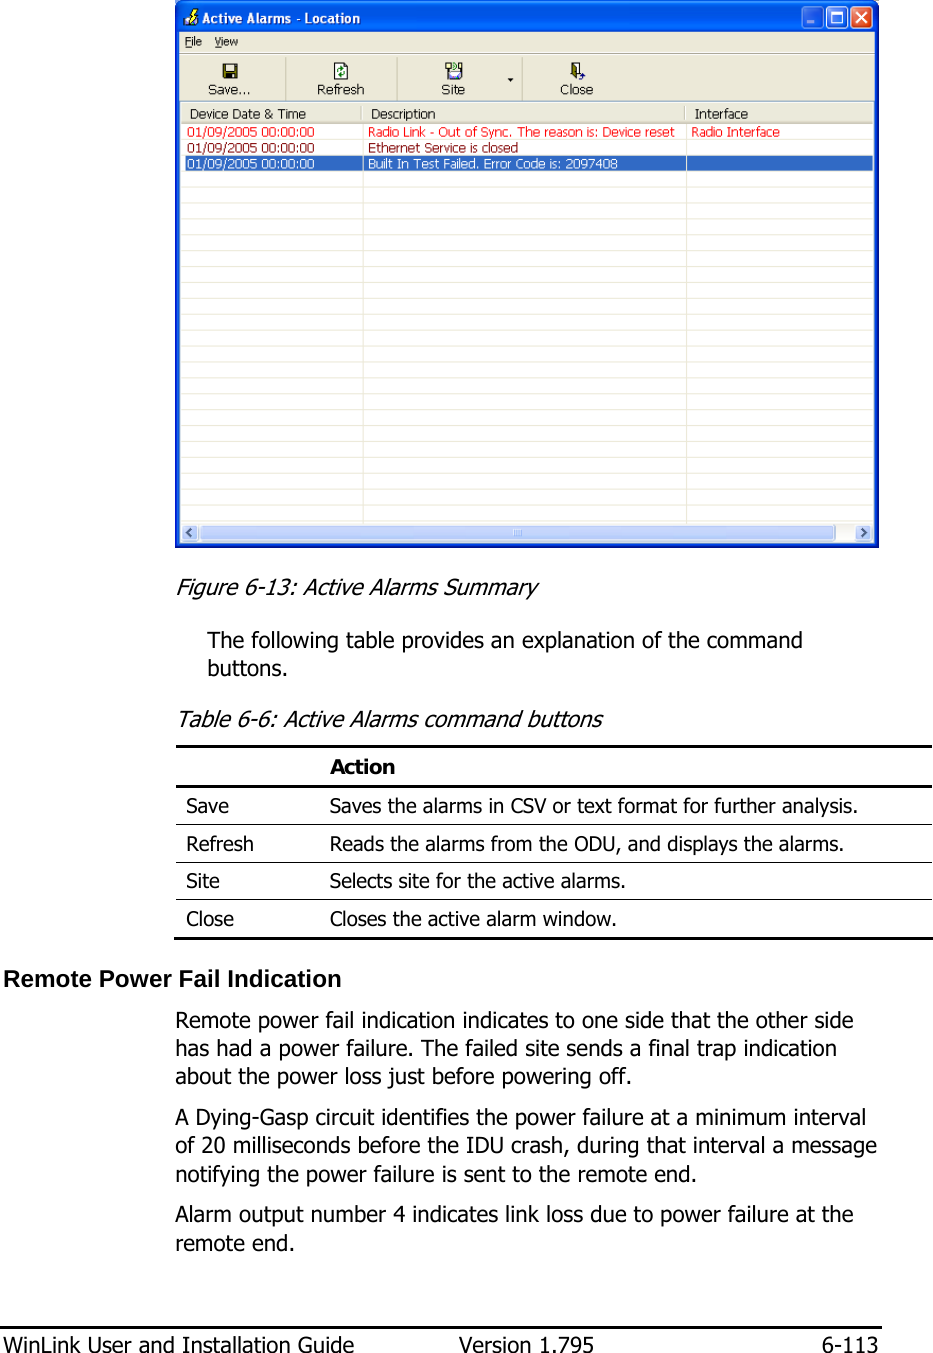  WinLink User and Installation Guide  Version 1.795  6-113   Figure  6-13: Active Alarms Summary The following table provides an explanation of the command buttons. Table  6-6: Active Alarms command buttons  Action Save  Saves the alarms in CSV or text format for further analysis. Refresh  Reads the alarms from the ODU, and displays the alarms. Site  Selects site for the active alarms. Close  Closes the active alarm window. Remote Power Fail Indication Remote power fail indication indicates to one side that the other side has had a power failure. The failed site sends a final trap indication about the power loss just before powering off. A Dying-Gasp circuit identifies the power failure at a minimum interval of 20 milliseconds before the IDU crash, during that interval a message notifying the power failure is sent to the remote end. Alarm output number 4 indicates link loss due to power failure at the remote end.   